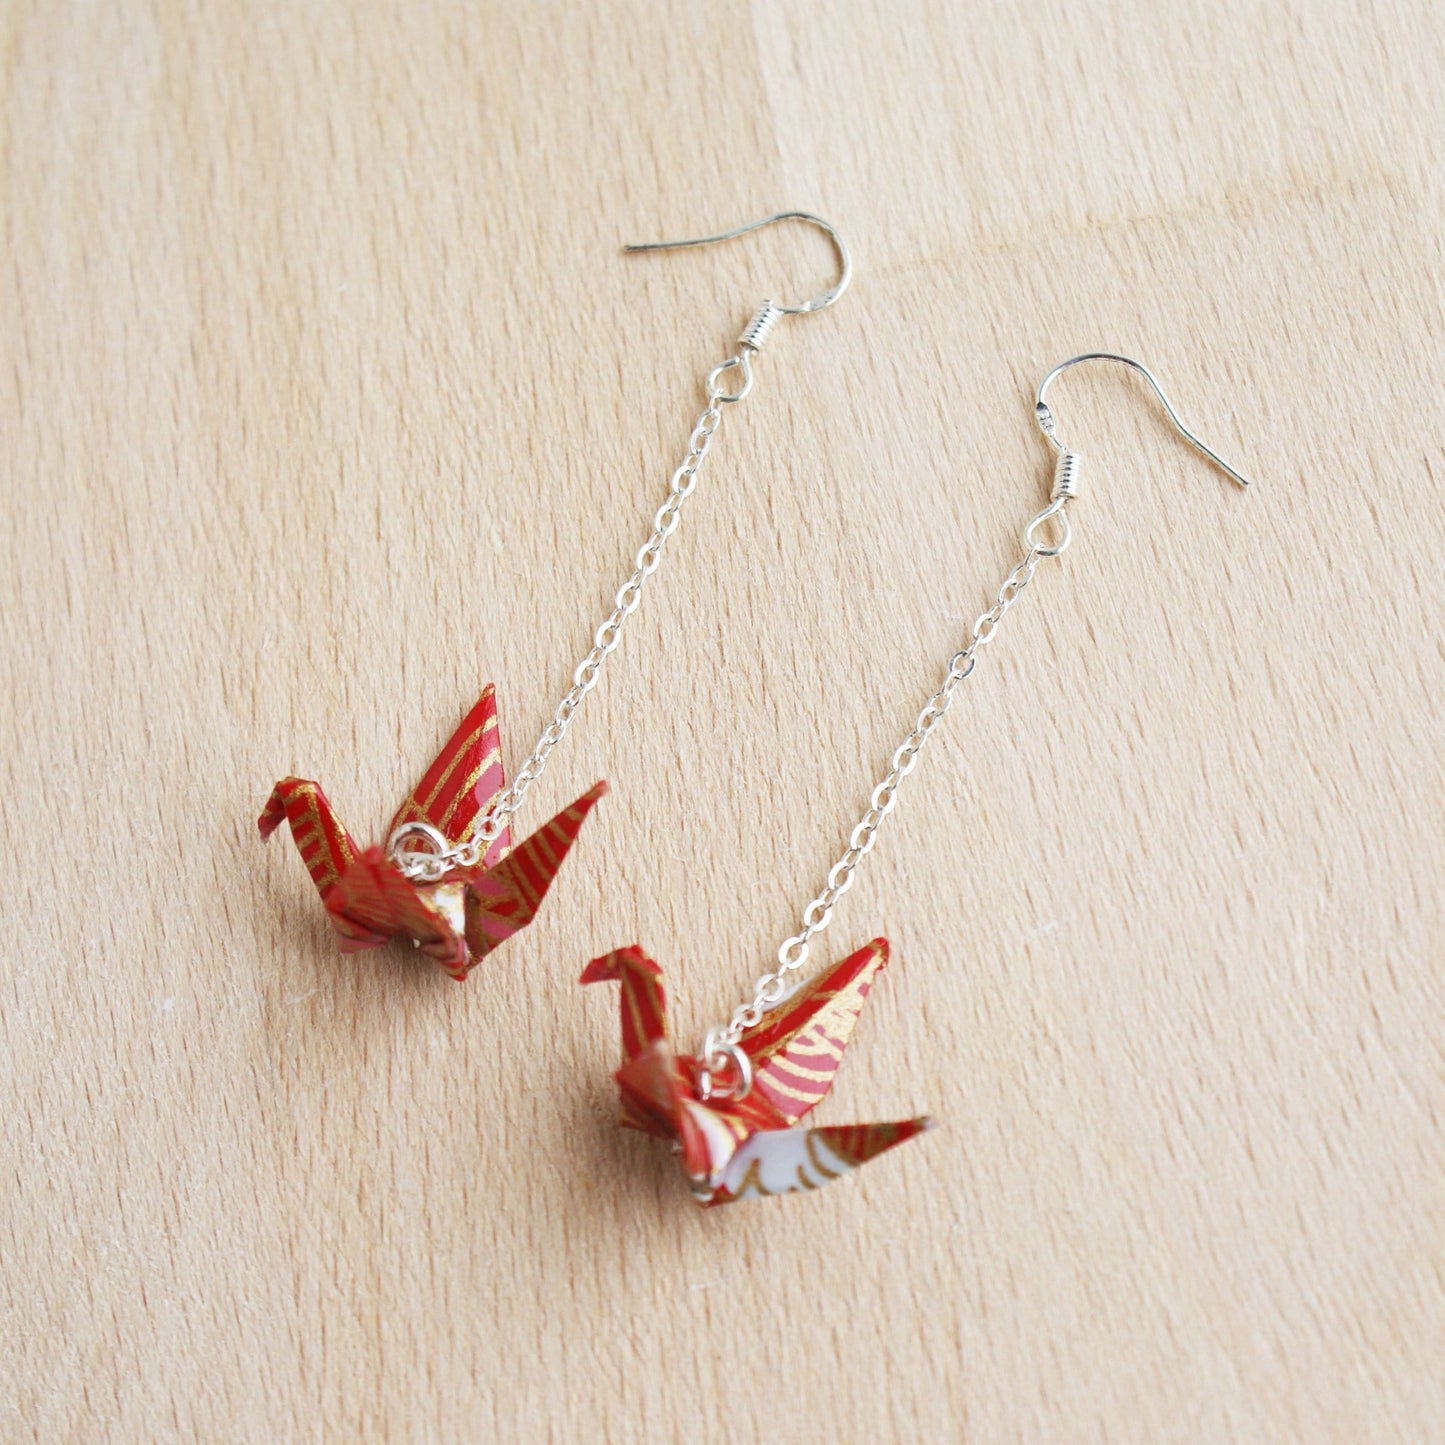 Japanese Origami Paper Crane Sterling Silver Earrings - Red Gold